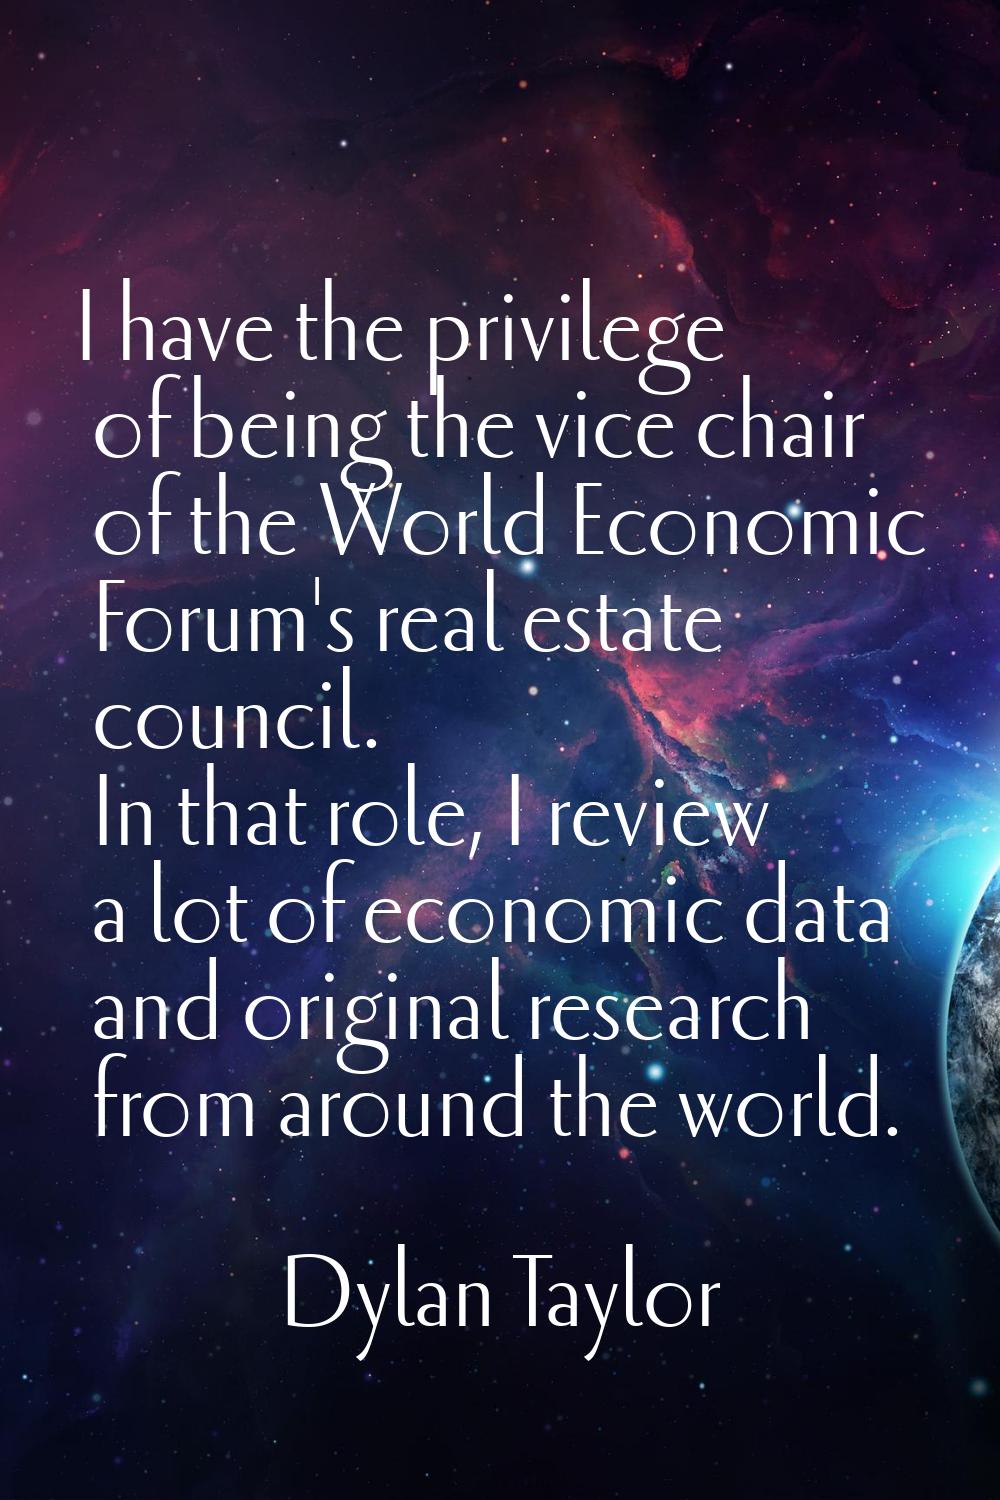 I have the privilege of being the vice chair of the World Economic Forum's real estate council. In 